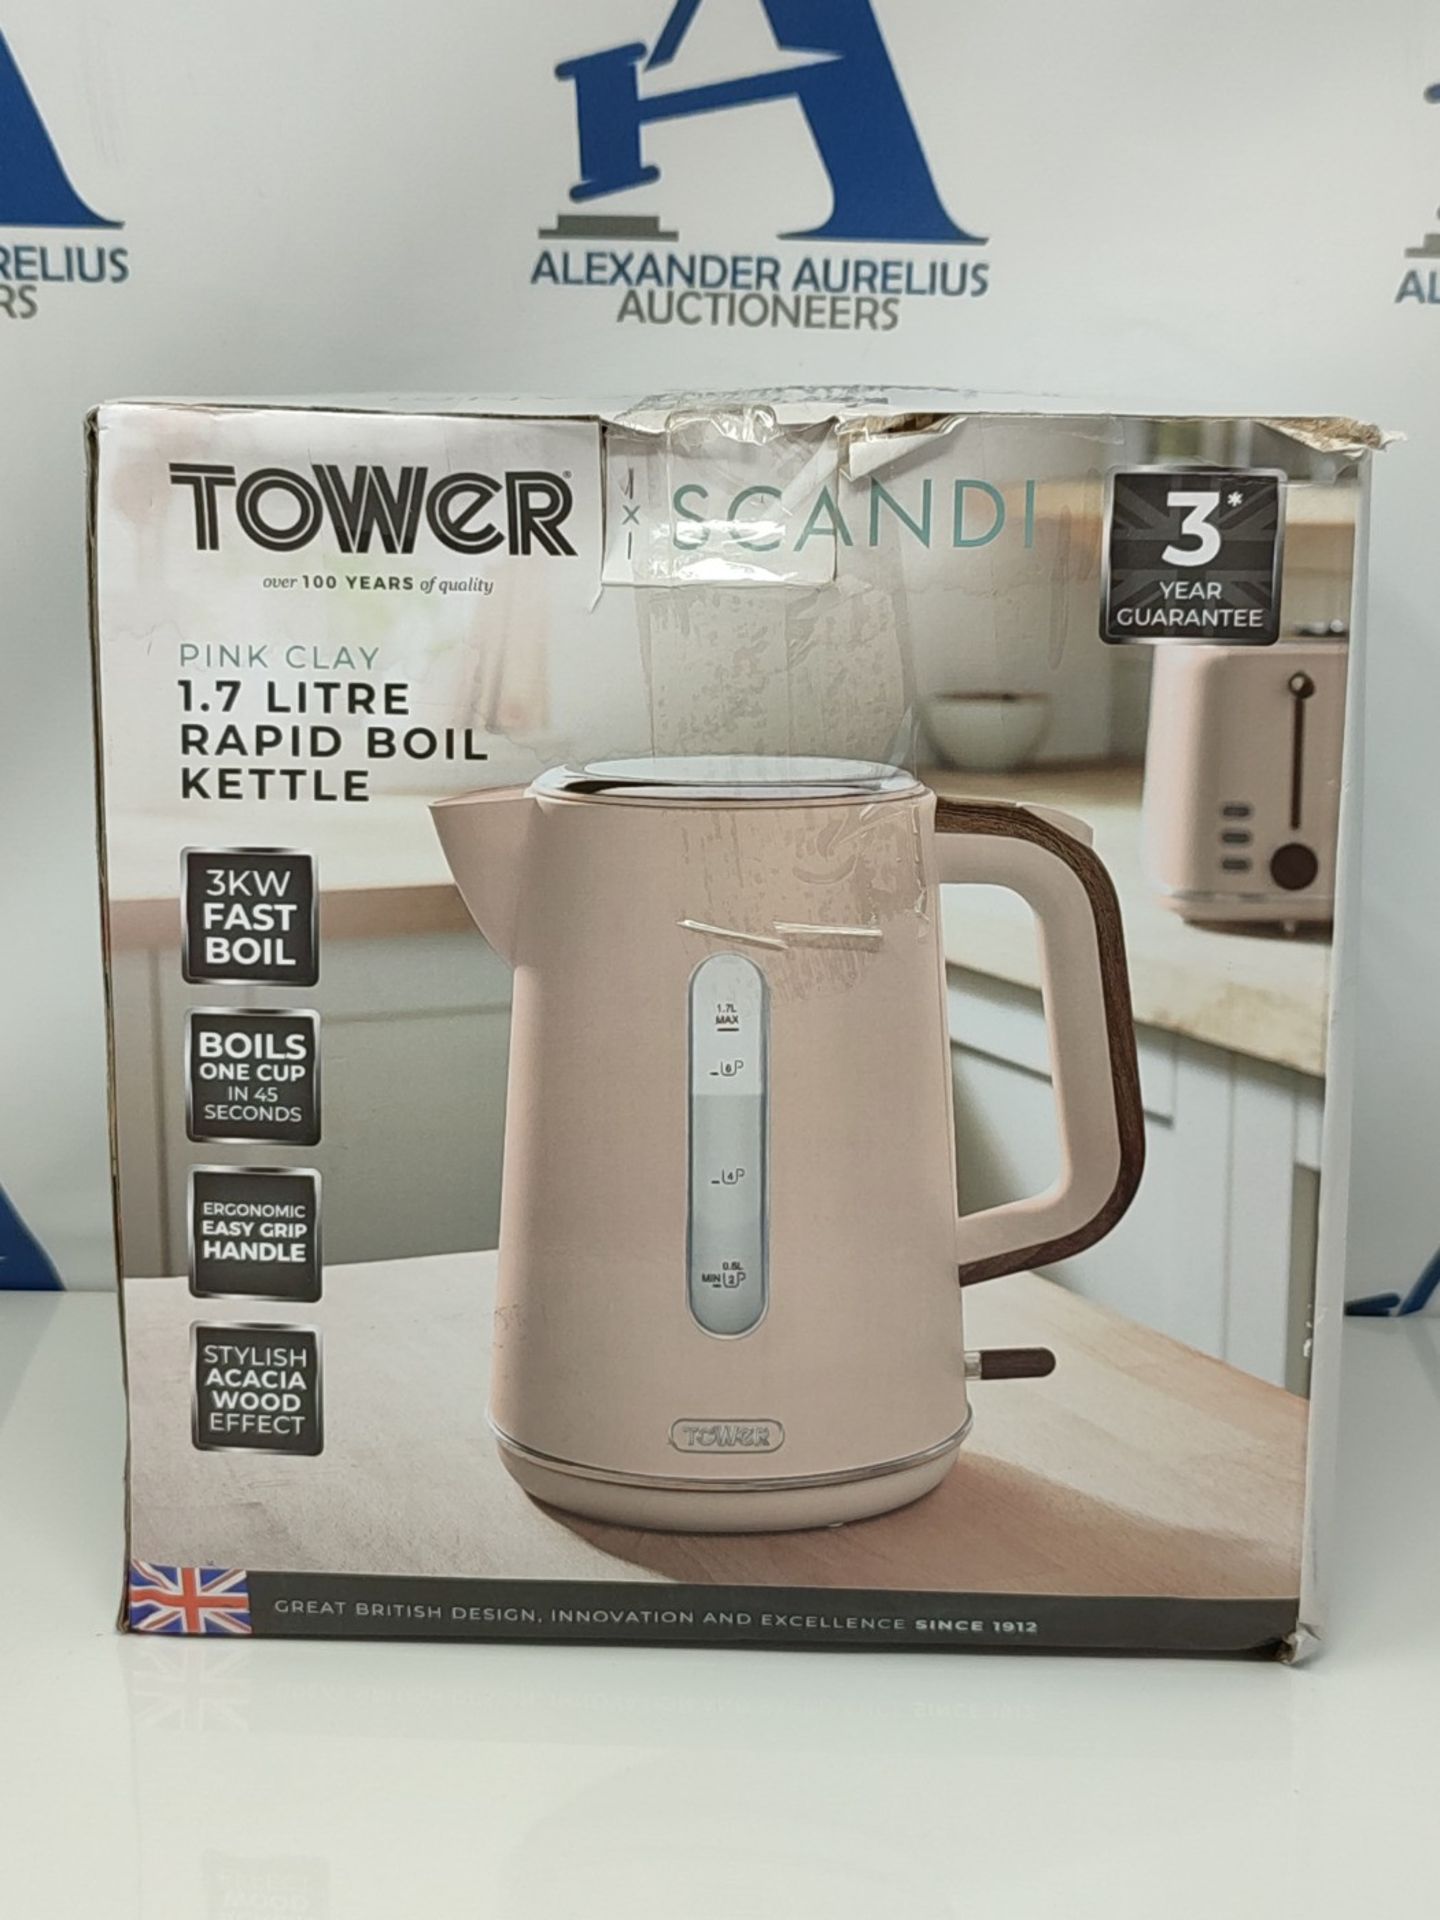 TOWER T10037PCLY Jug Kettle with Rapid Boil, 1.7 L, 3000W, Pink Clay - Image 2 of 3